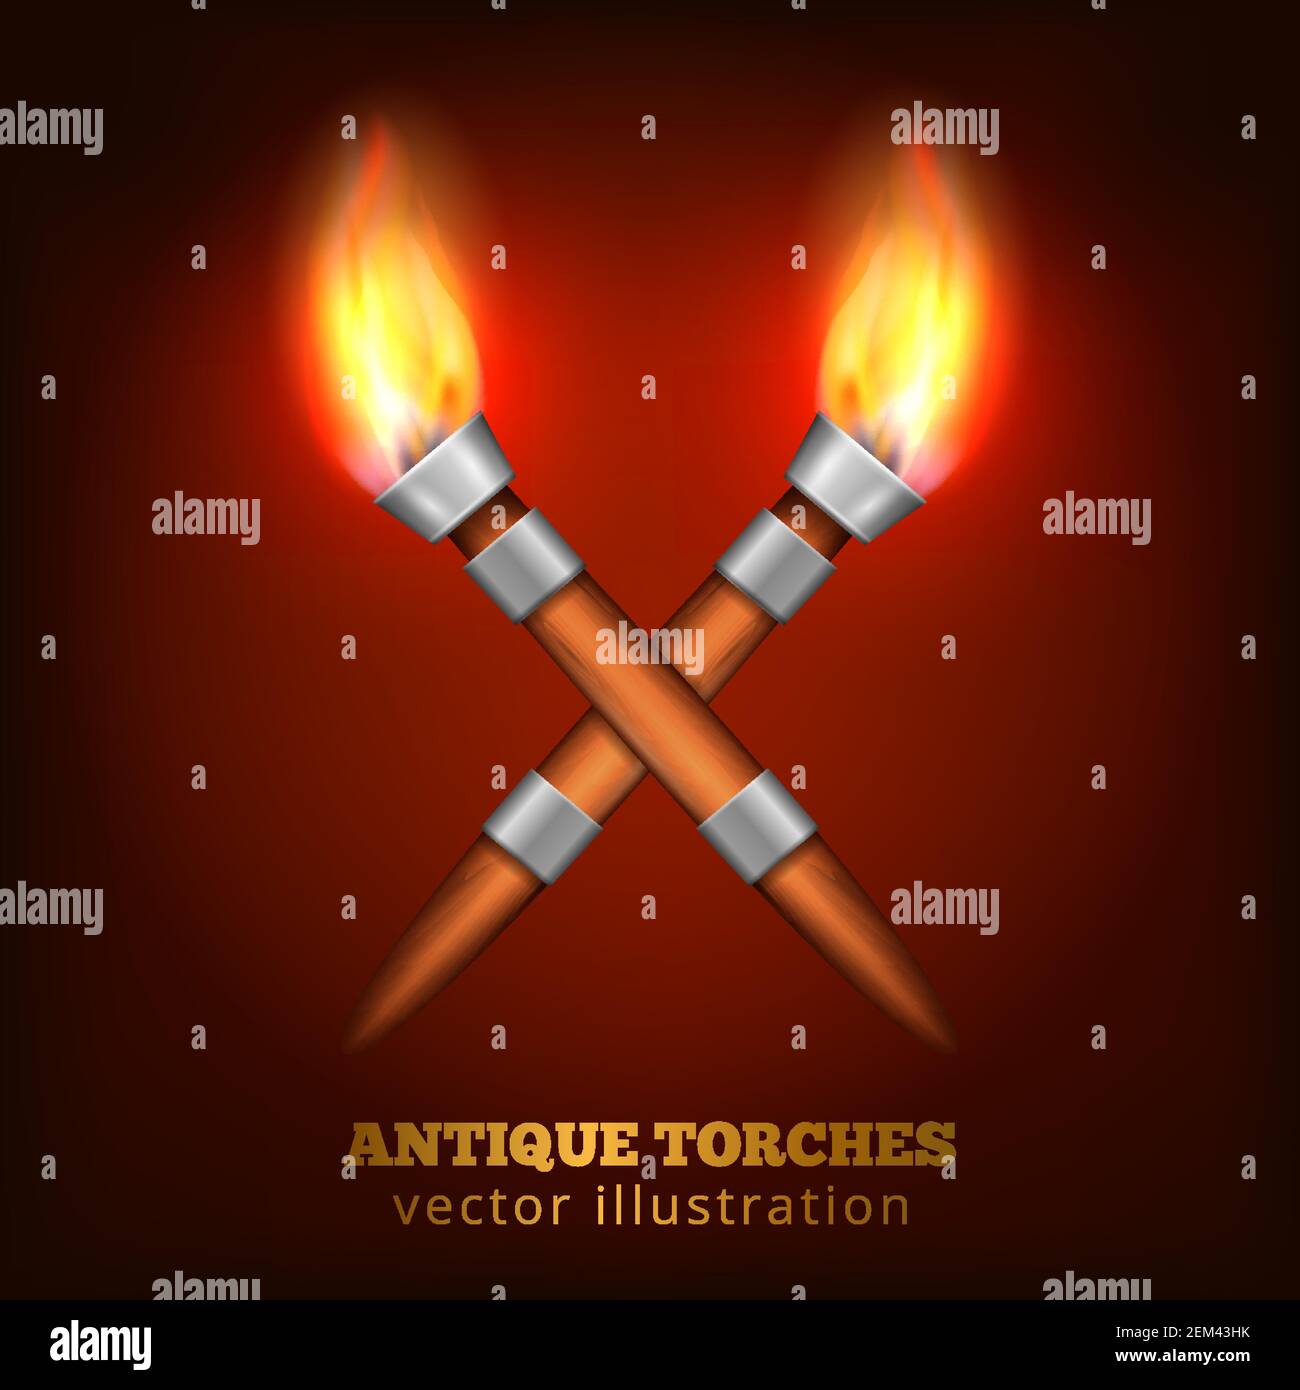 Crossed torches realistic composition with two burning torchlights made of wood and steel with text vector illustration Stock Vector